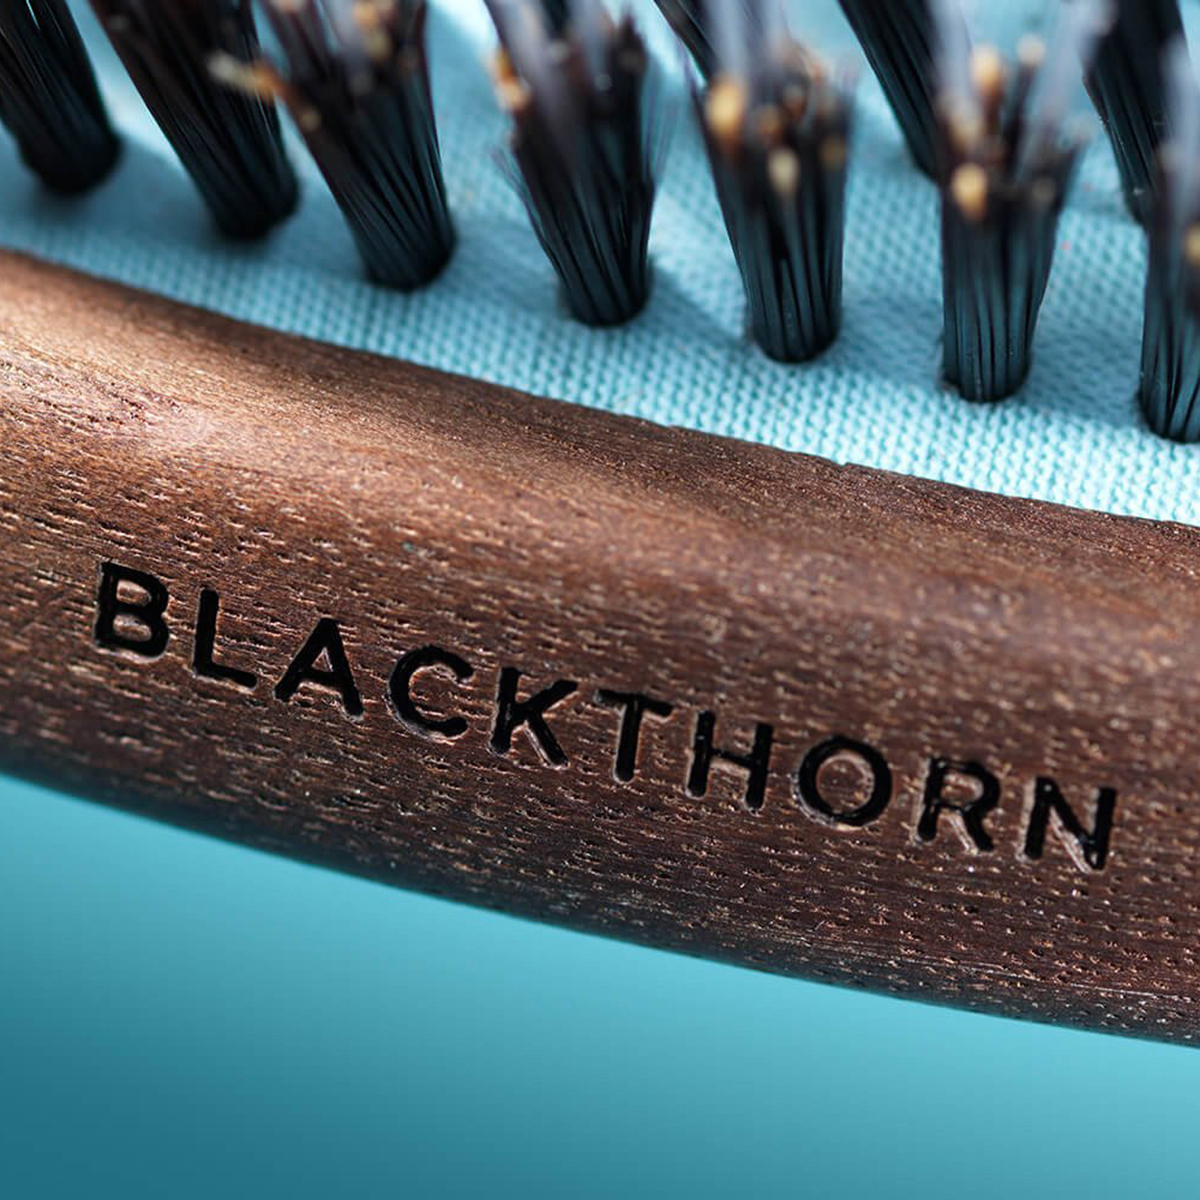 Delphin & Emerence - Blackthorn Tangle Power Strong Hairbrush